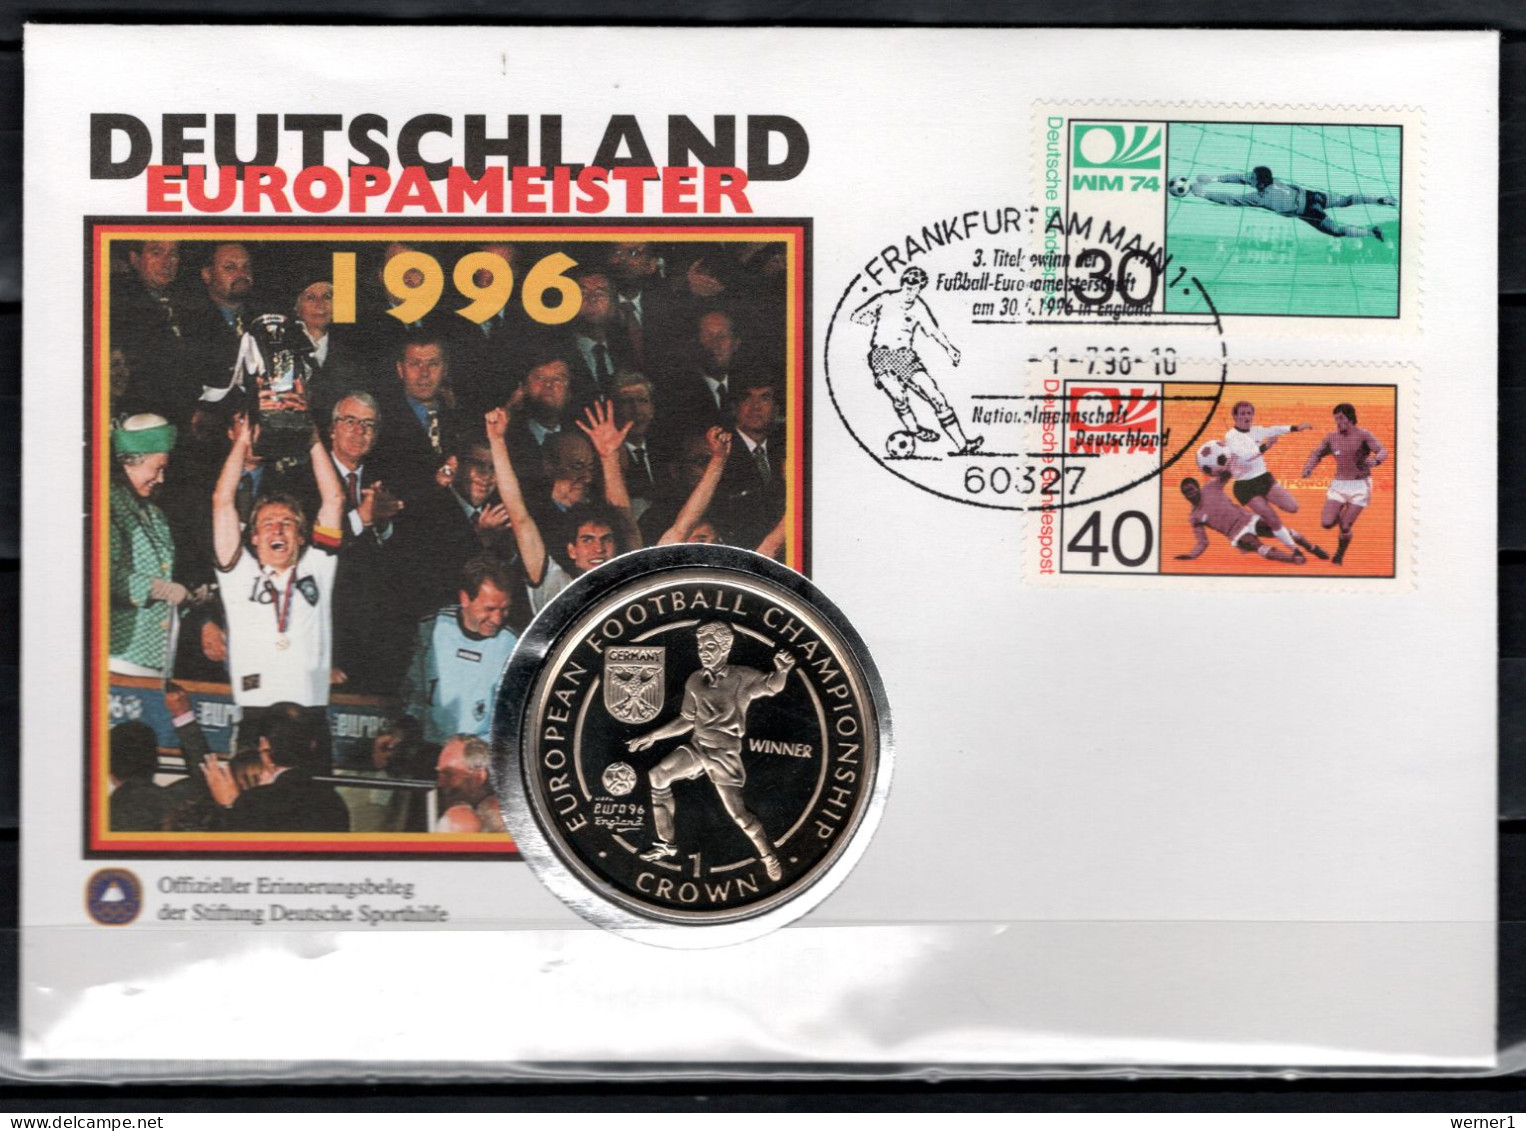 Germany 1996 Football Soccer European Championship Com. Numismatic Cover With 1 Crown Coin From Isle Of Man - UEFA European Championship